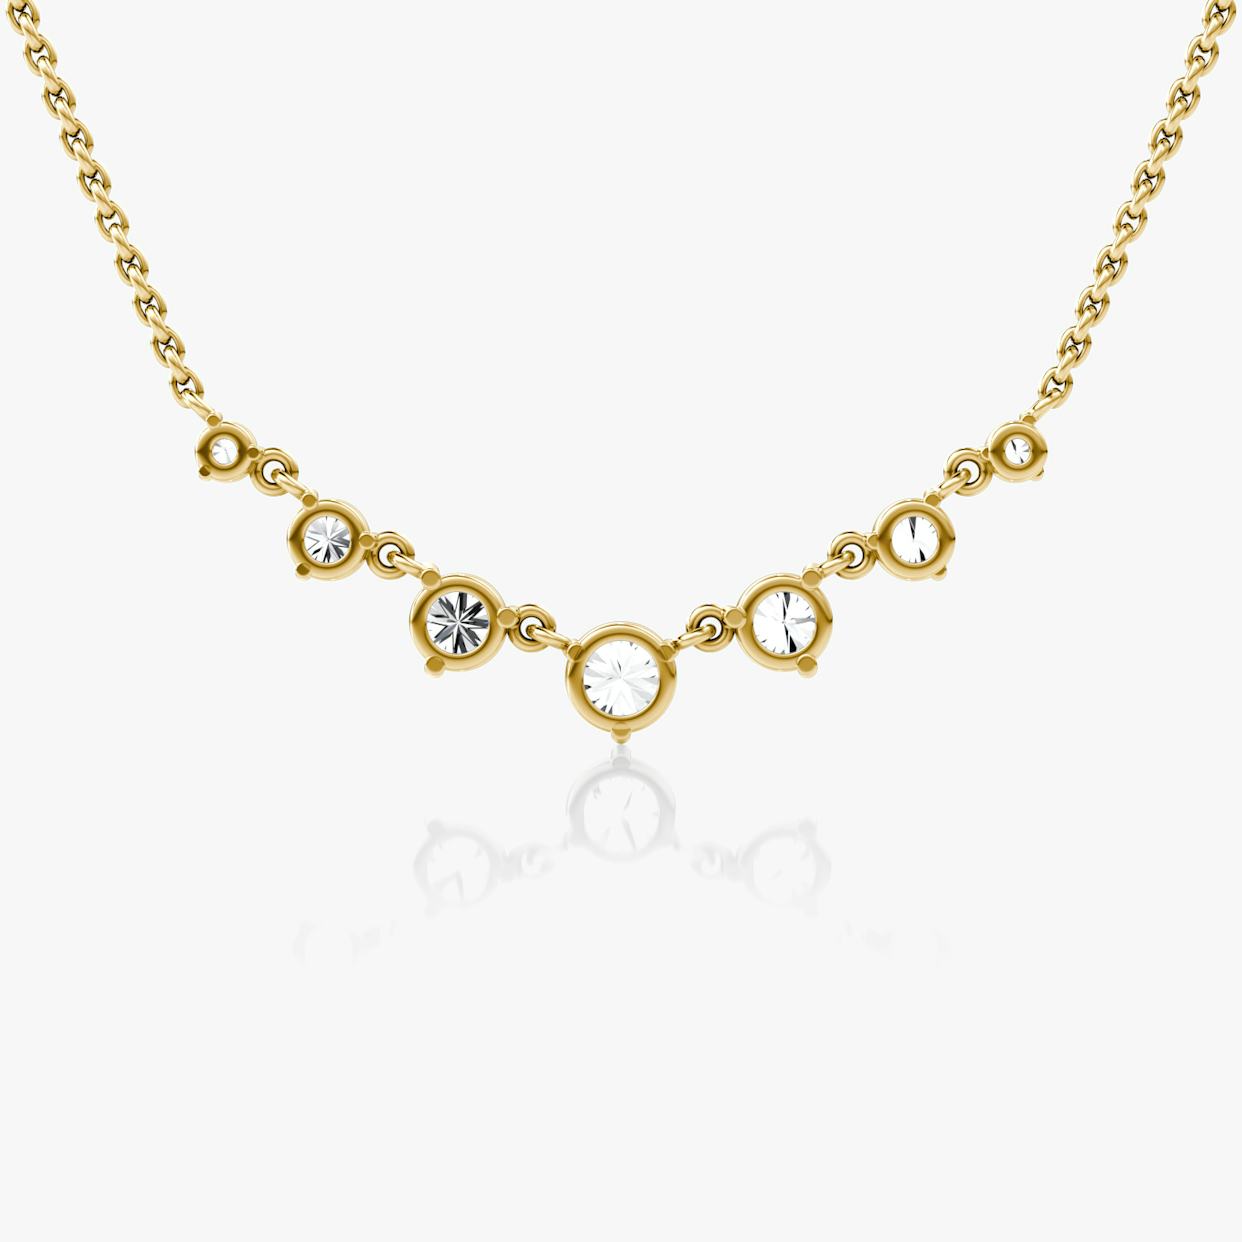 Linked Tennis Necklace | VRAI